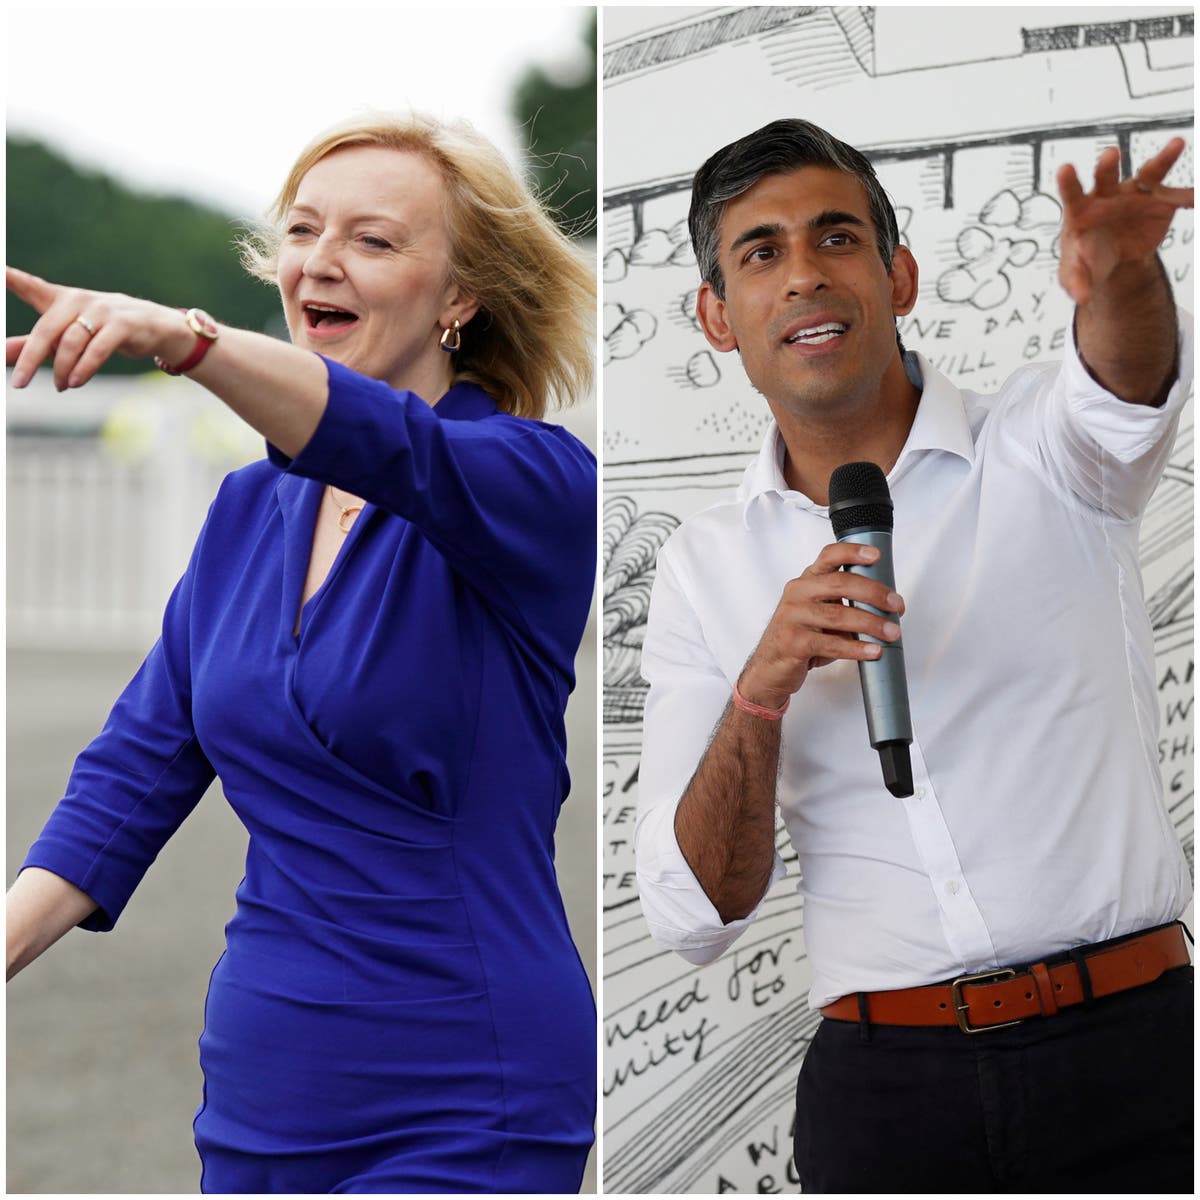 Sunak and Truss tear one another aside on economic system in newest management hustings